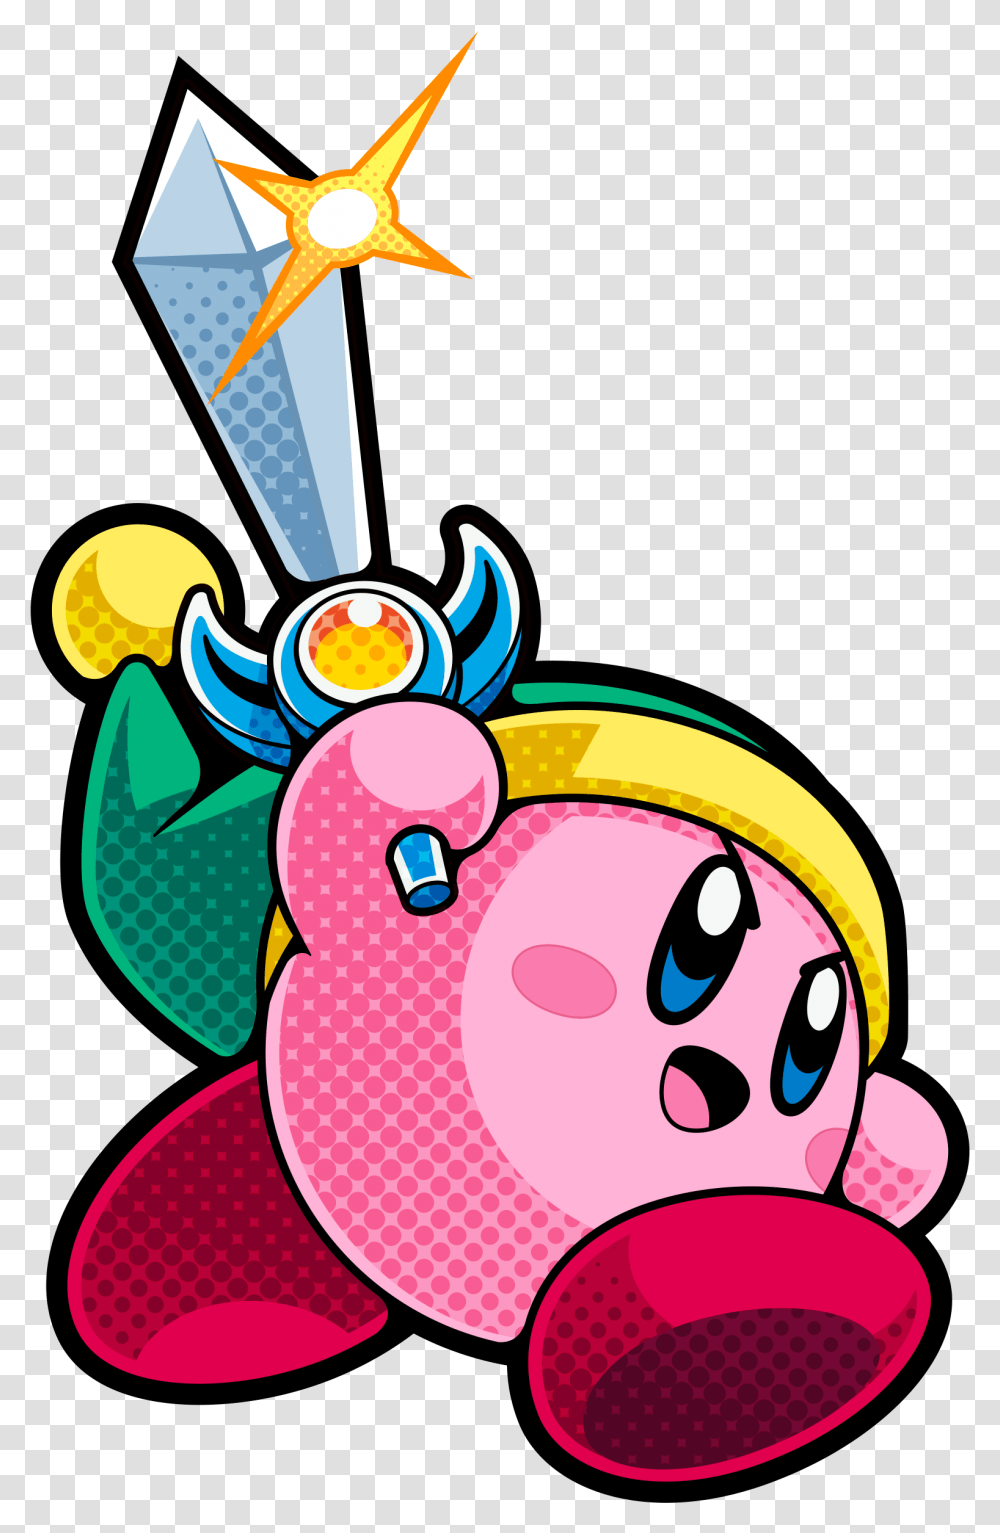 Voting Kirby As Most Popular Video Game Kirby Battle Royale Kirby, Cross, Symbol, Angry Birds Transparent Png